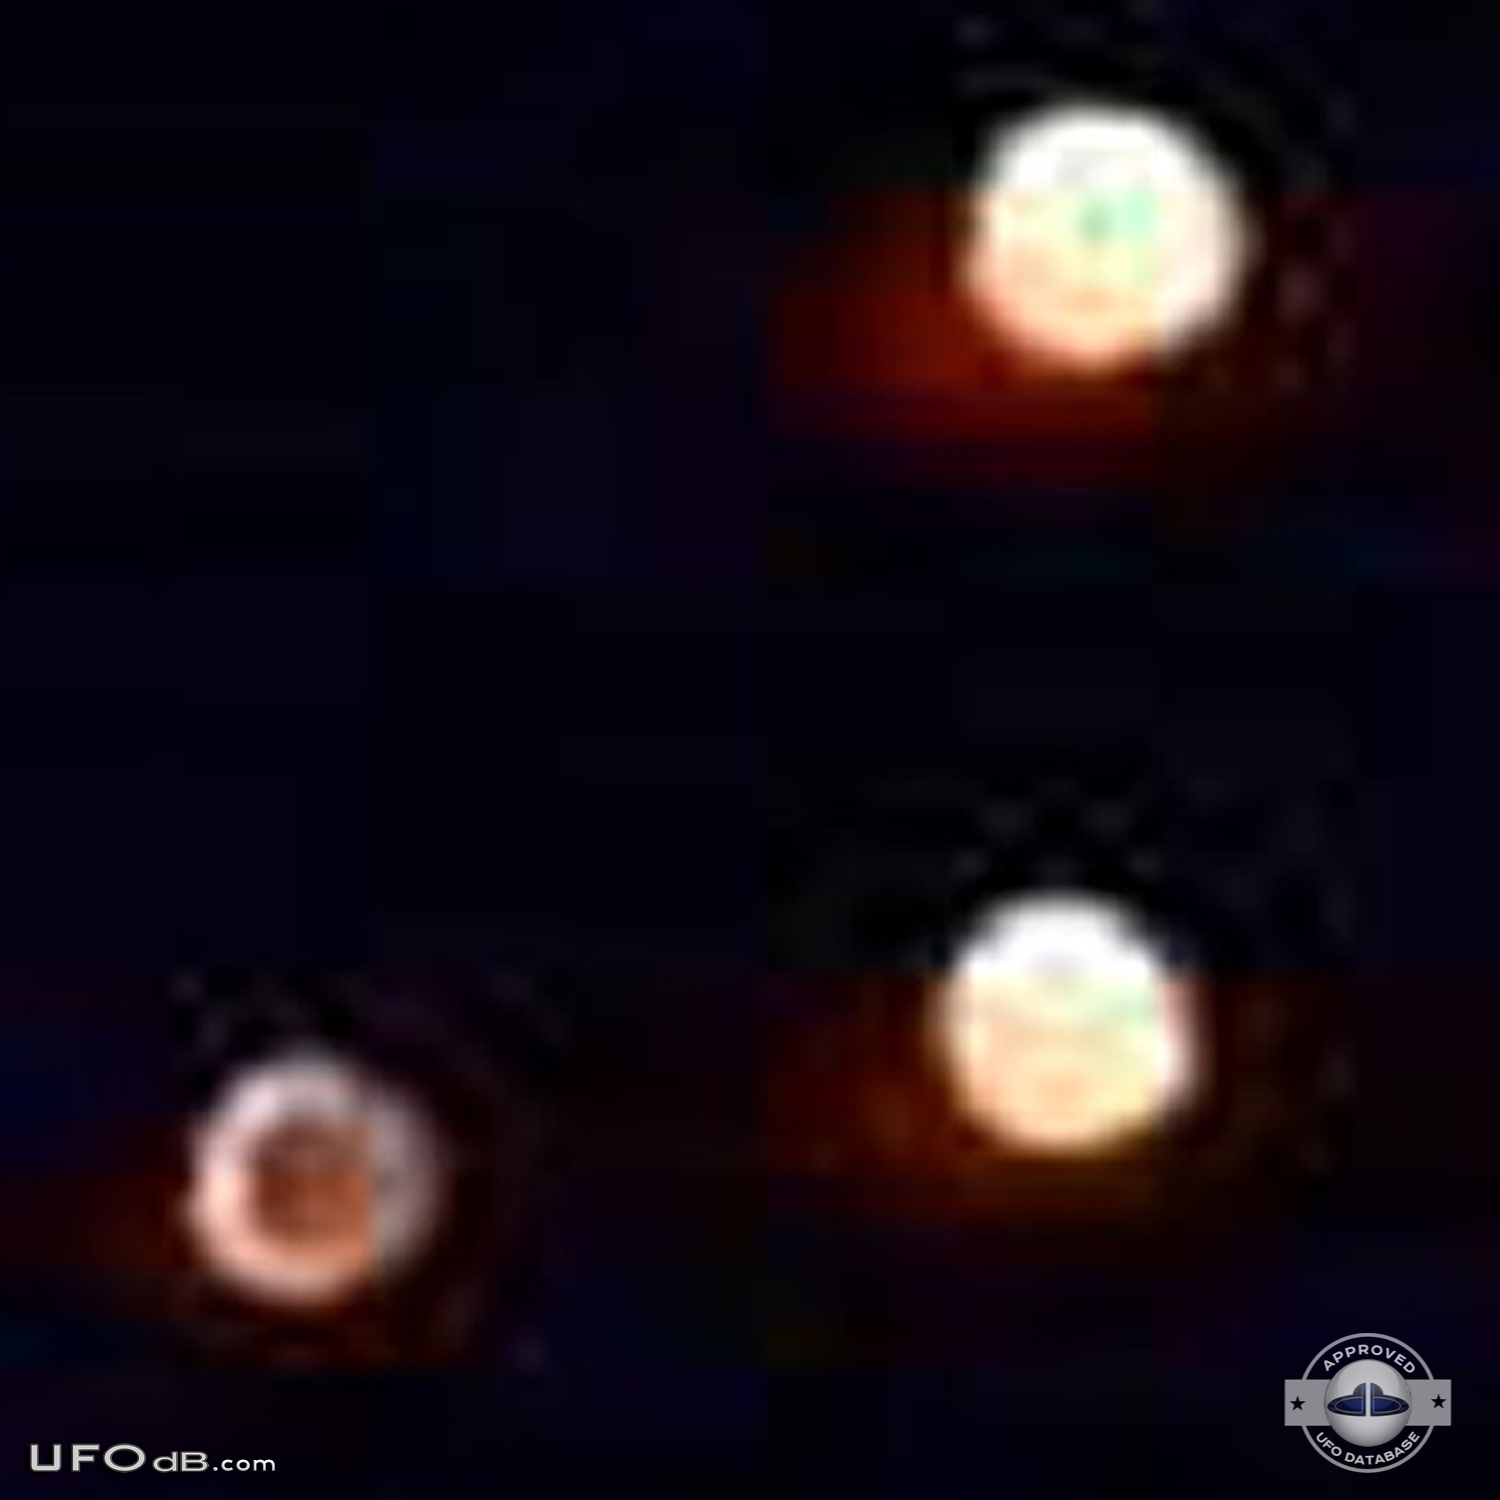 Strange trio of spherical UFOs caught on photo over Israel - 1992 UFO Picture #402-4